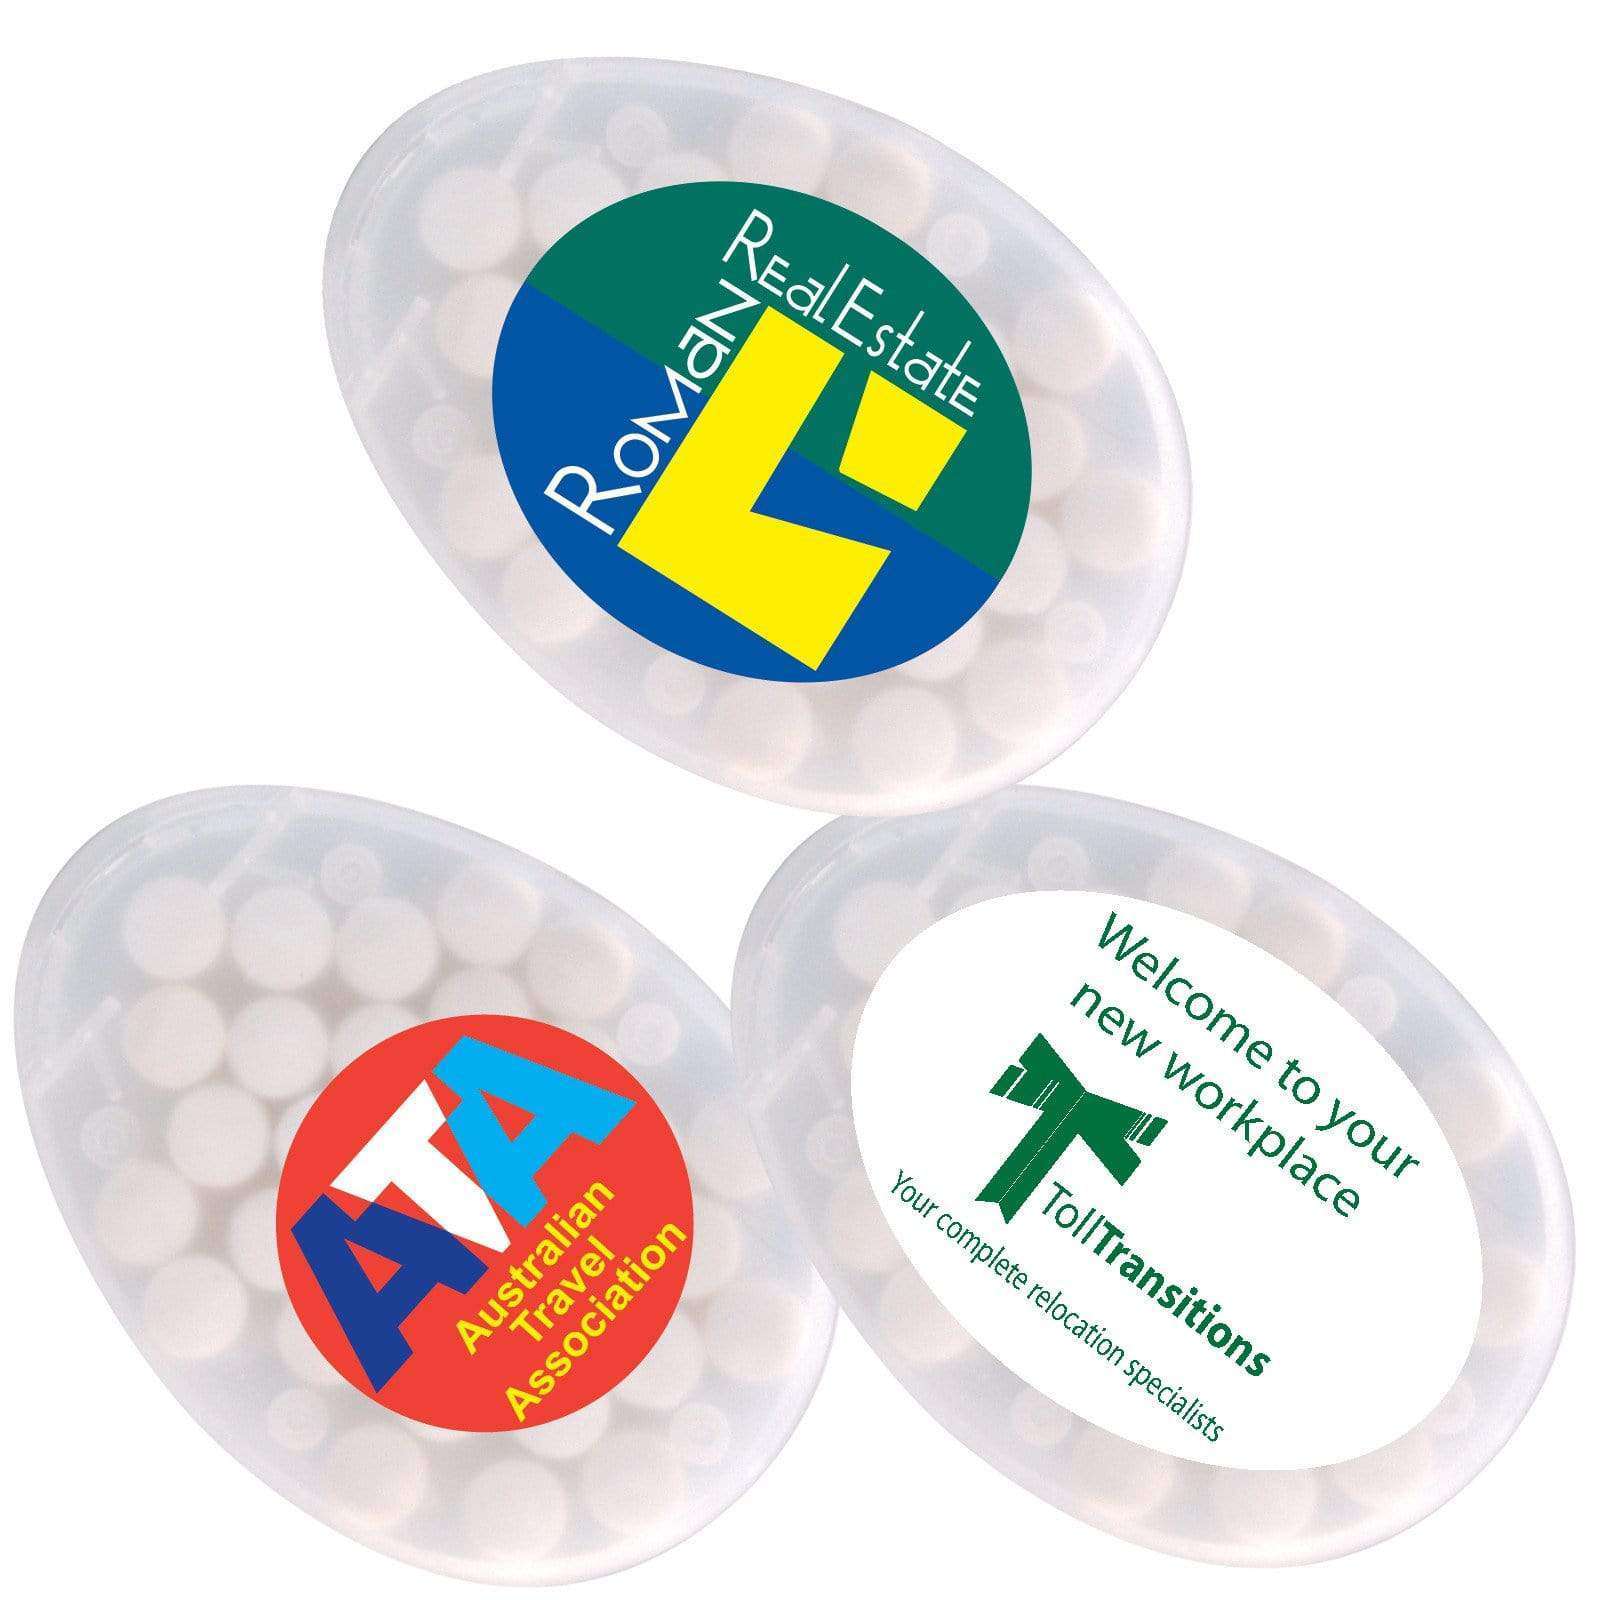 Sugar Free Breath Mints - Egg Shape Promotional packs - 250 packs Goody Goody Gum Drops online lolly shop